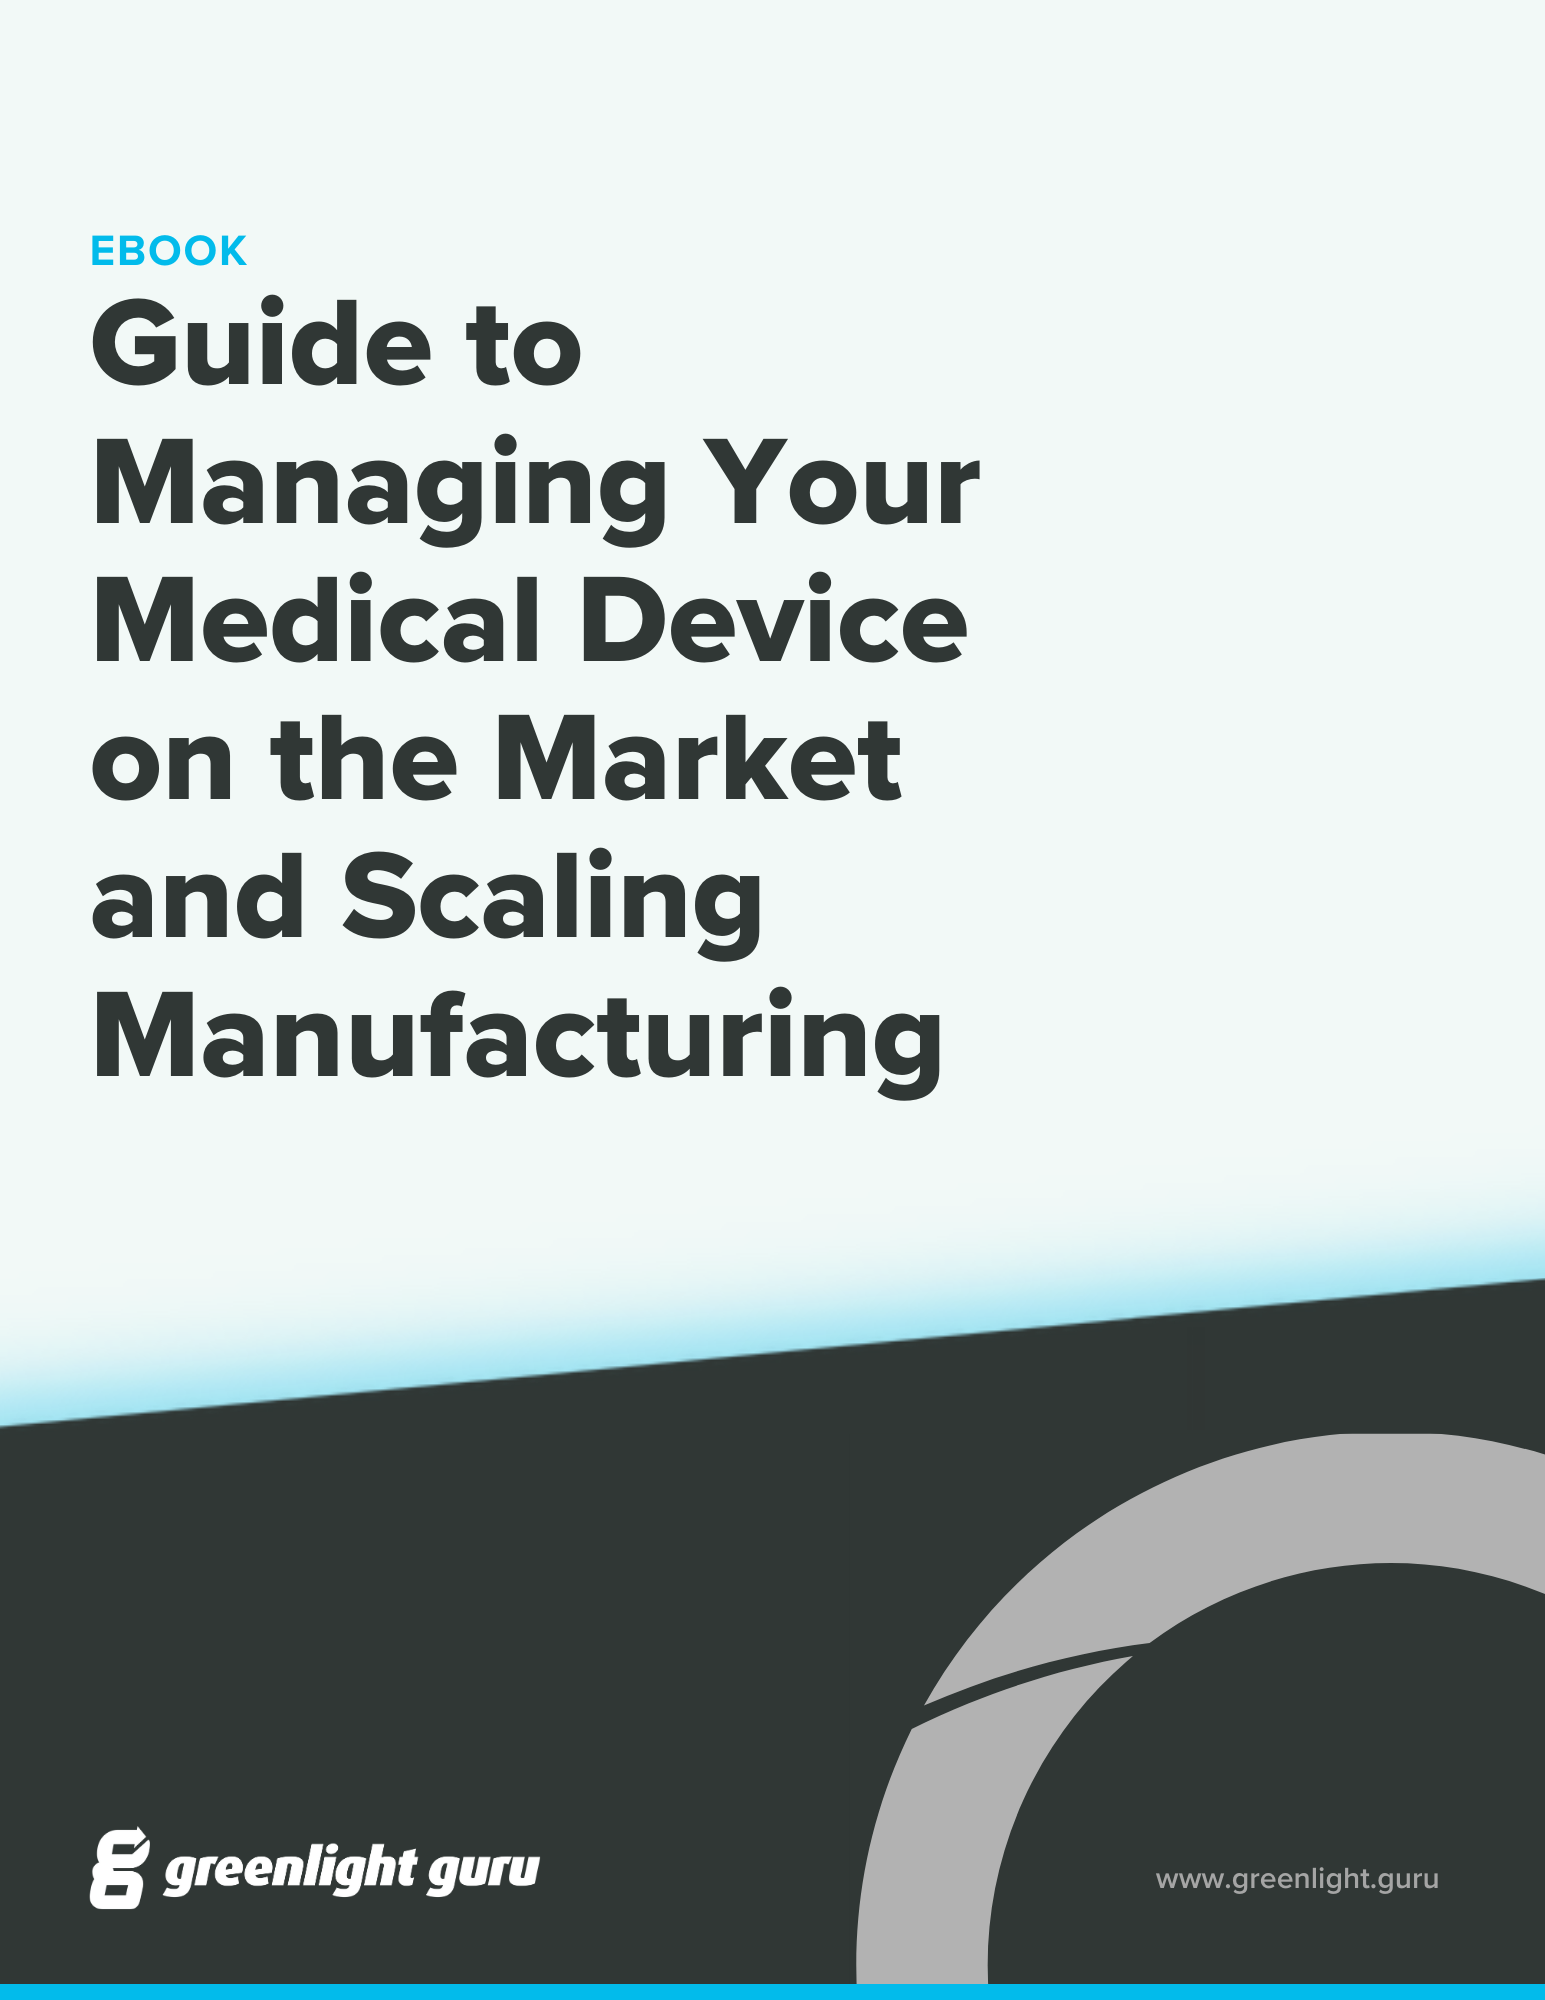 Enterprise Guide to Managing Your Medical Device on the Market and Scaling Manufacturing - ebook cover